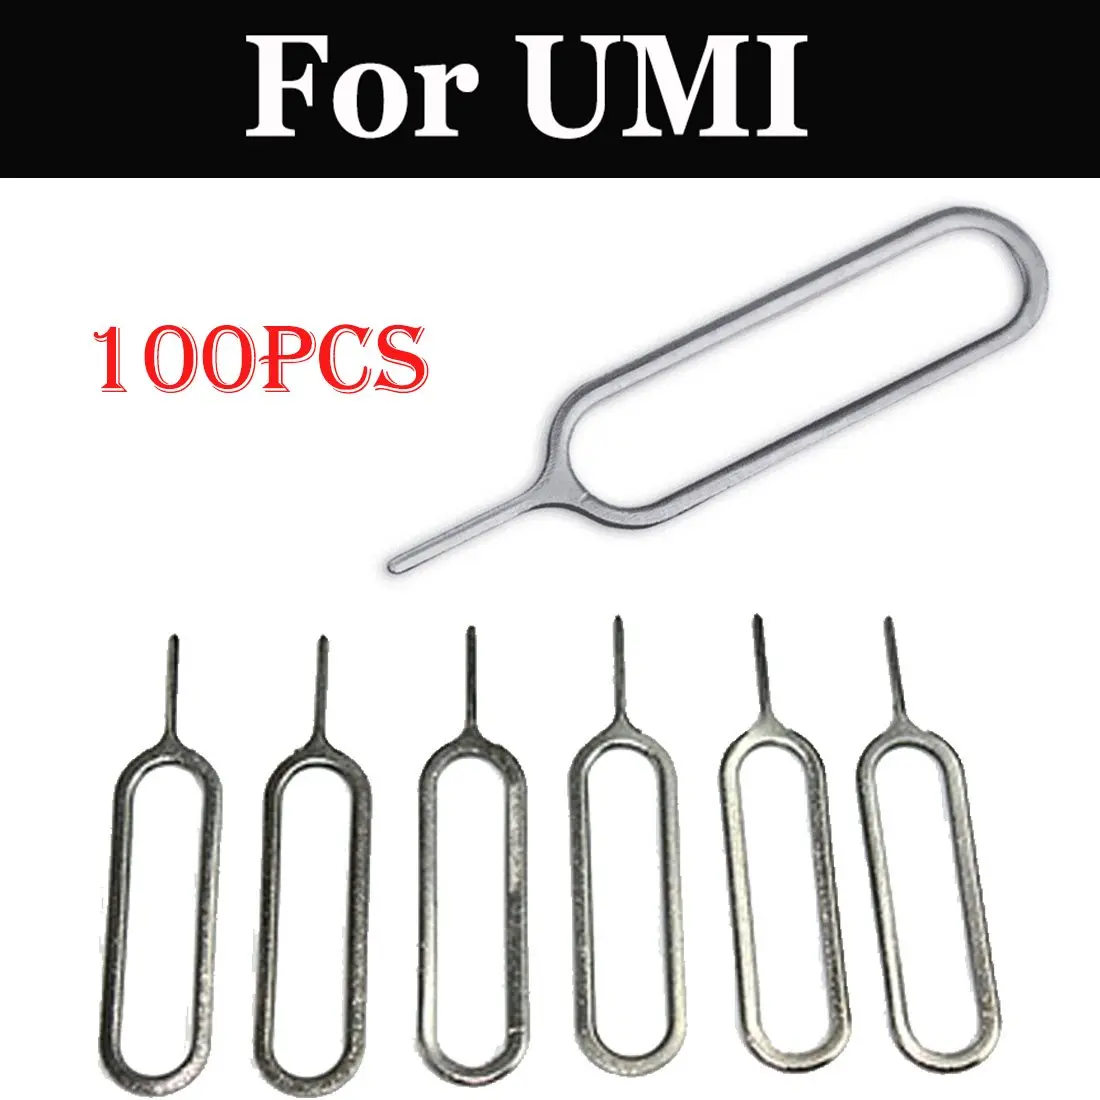 100pcs High Quality SIM Card Tray Removal Eject Pin For UMI London Diamond X Rome Max Super Touch Plus Z Pro C NOTE |